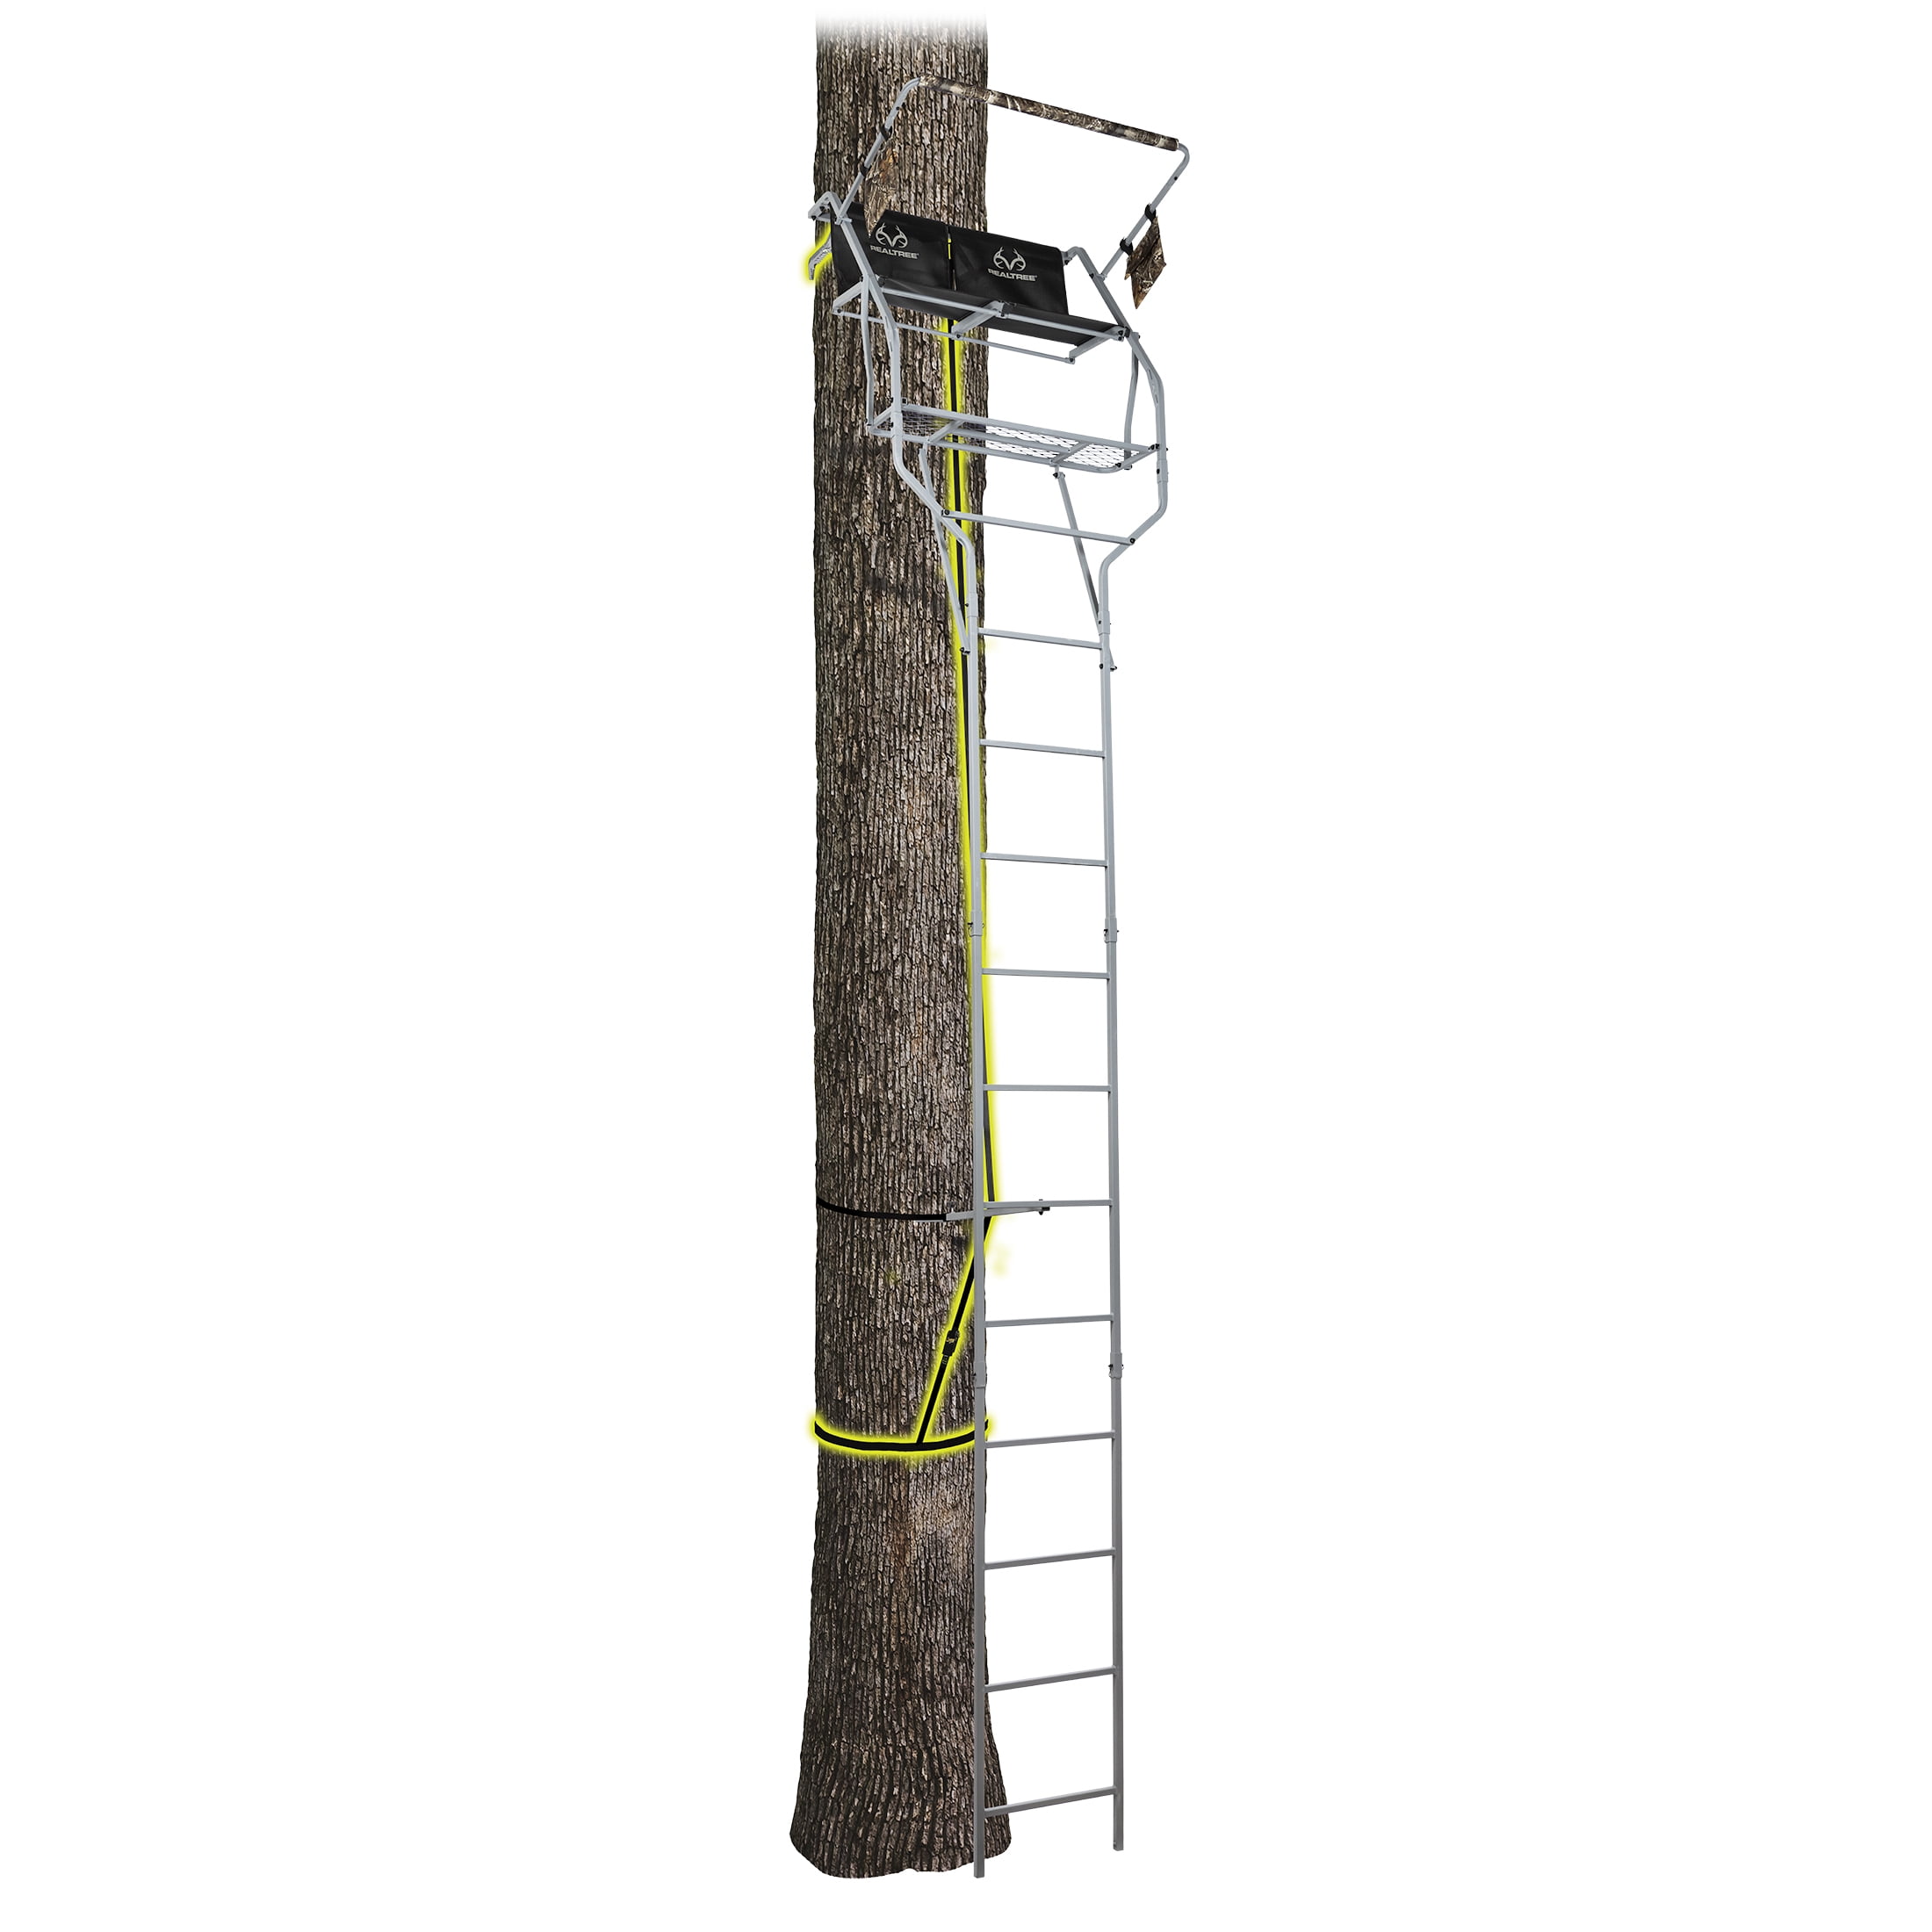 Two-man Ladderstand Trail Bench Wtih Jaw System Realtree Camo Pad 15 FT for sale online 